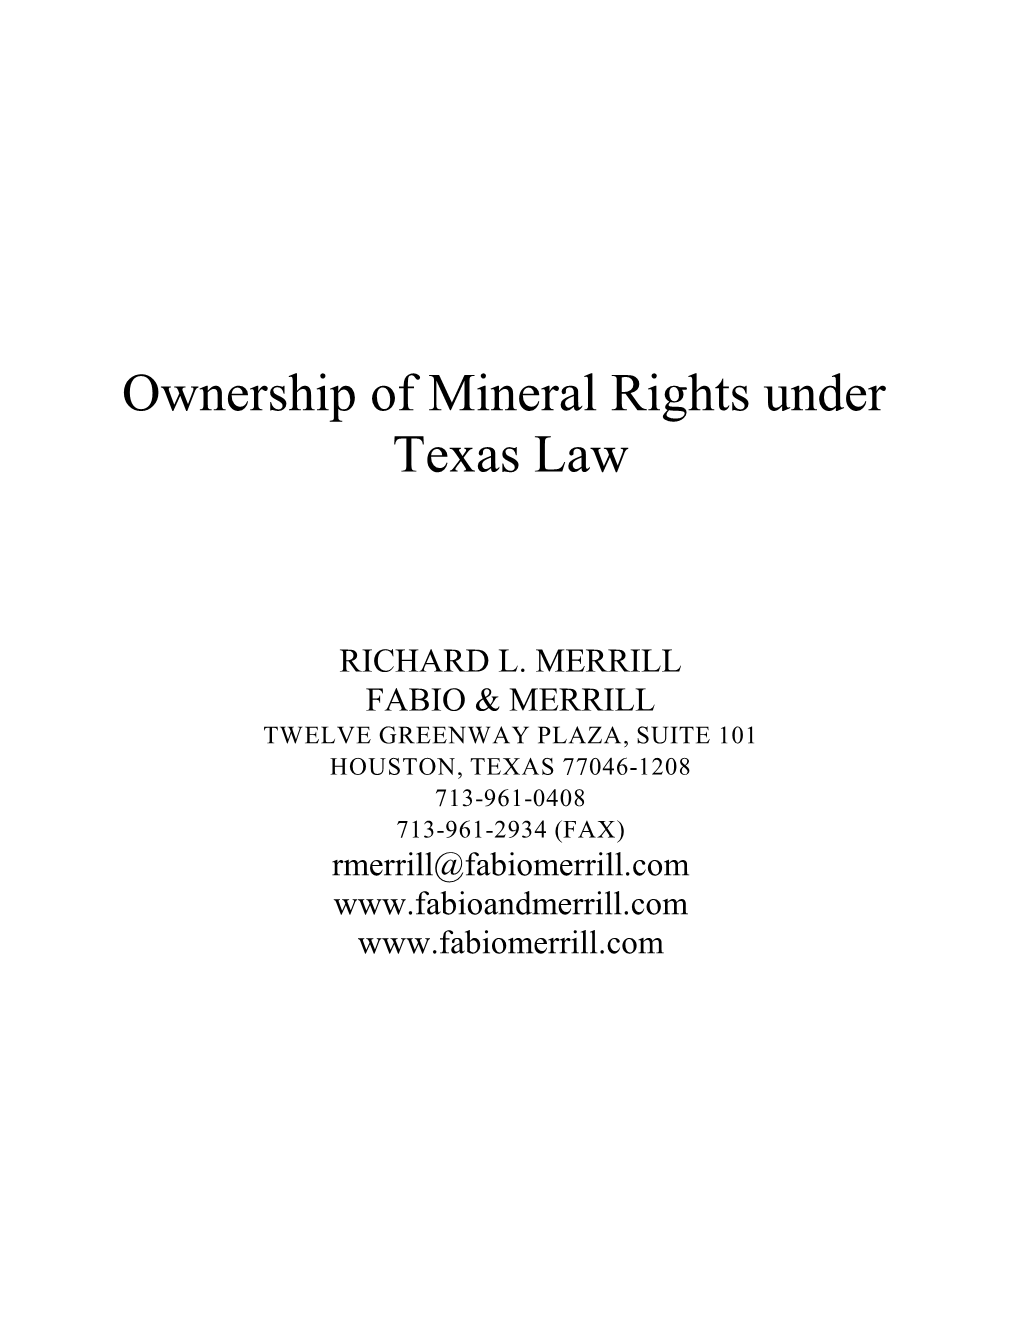 Ownership of Mineral Rights Under Texas Law